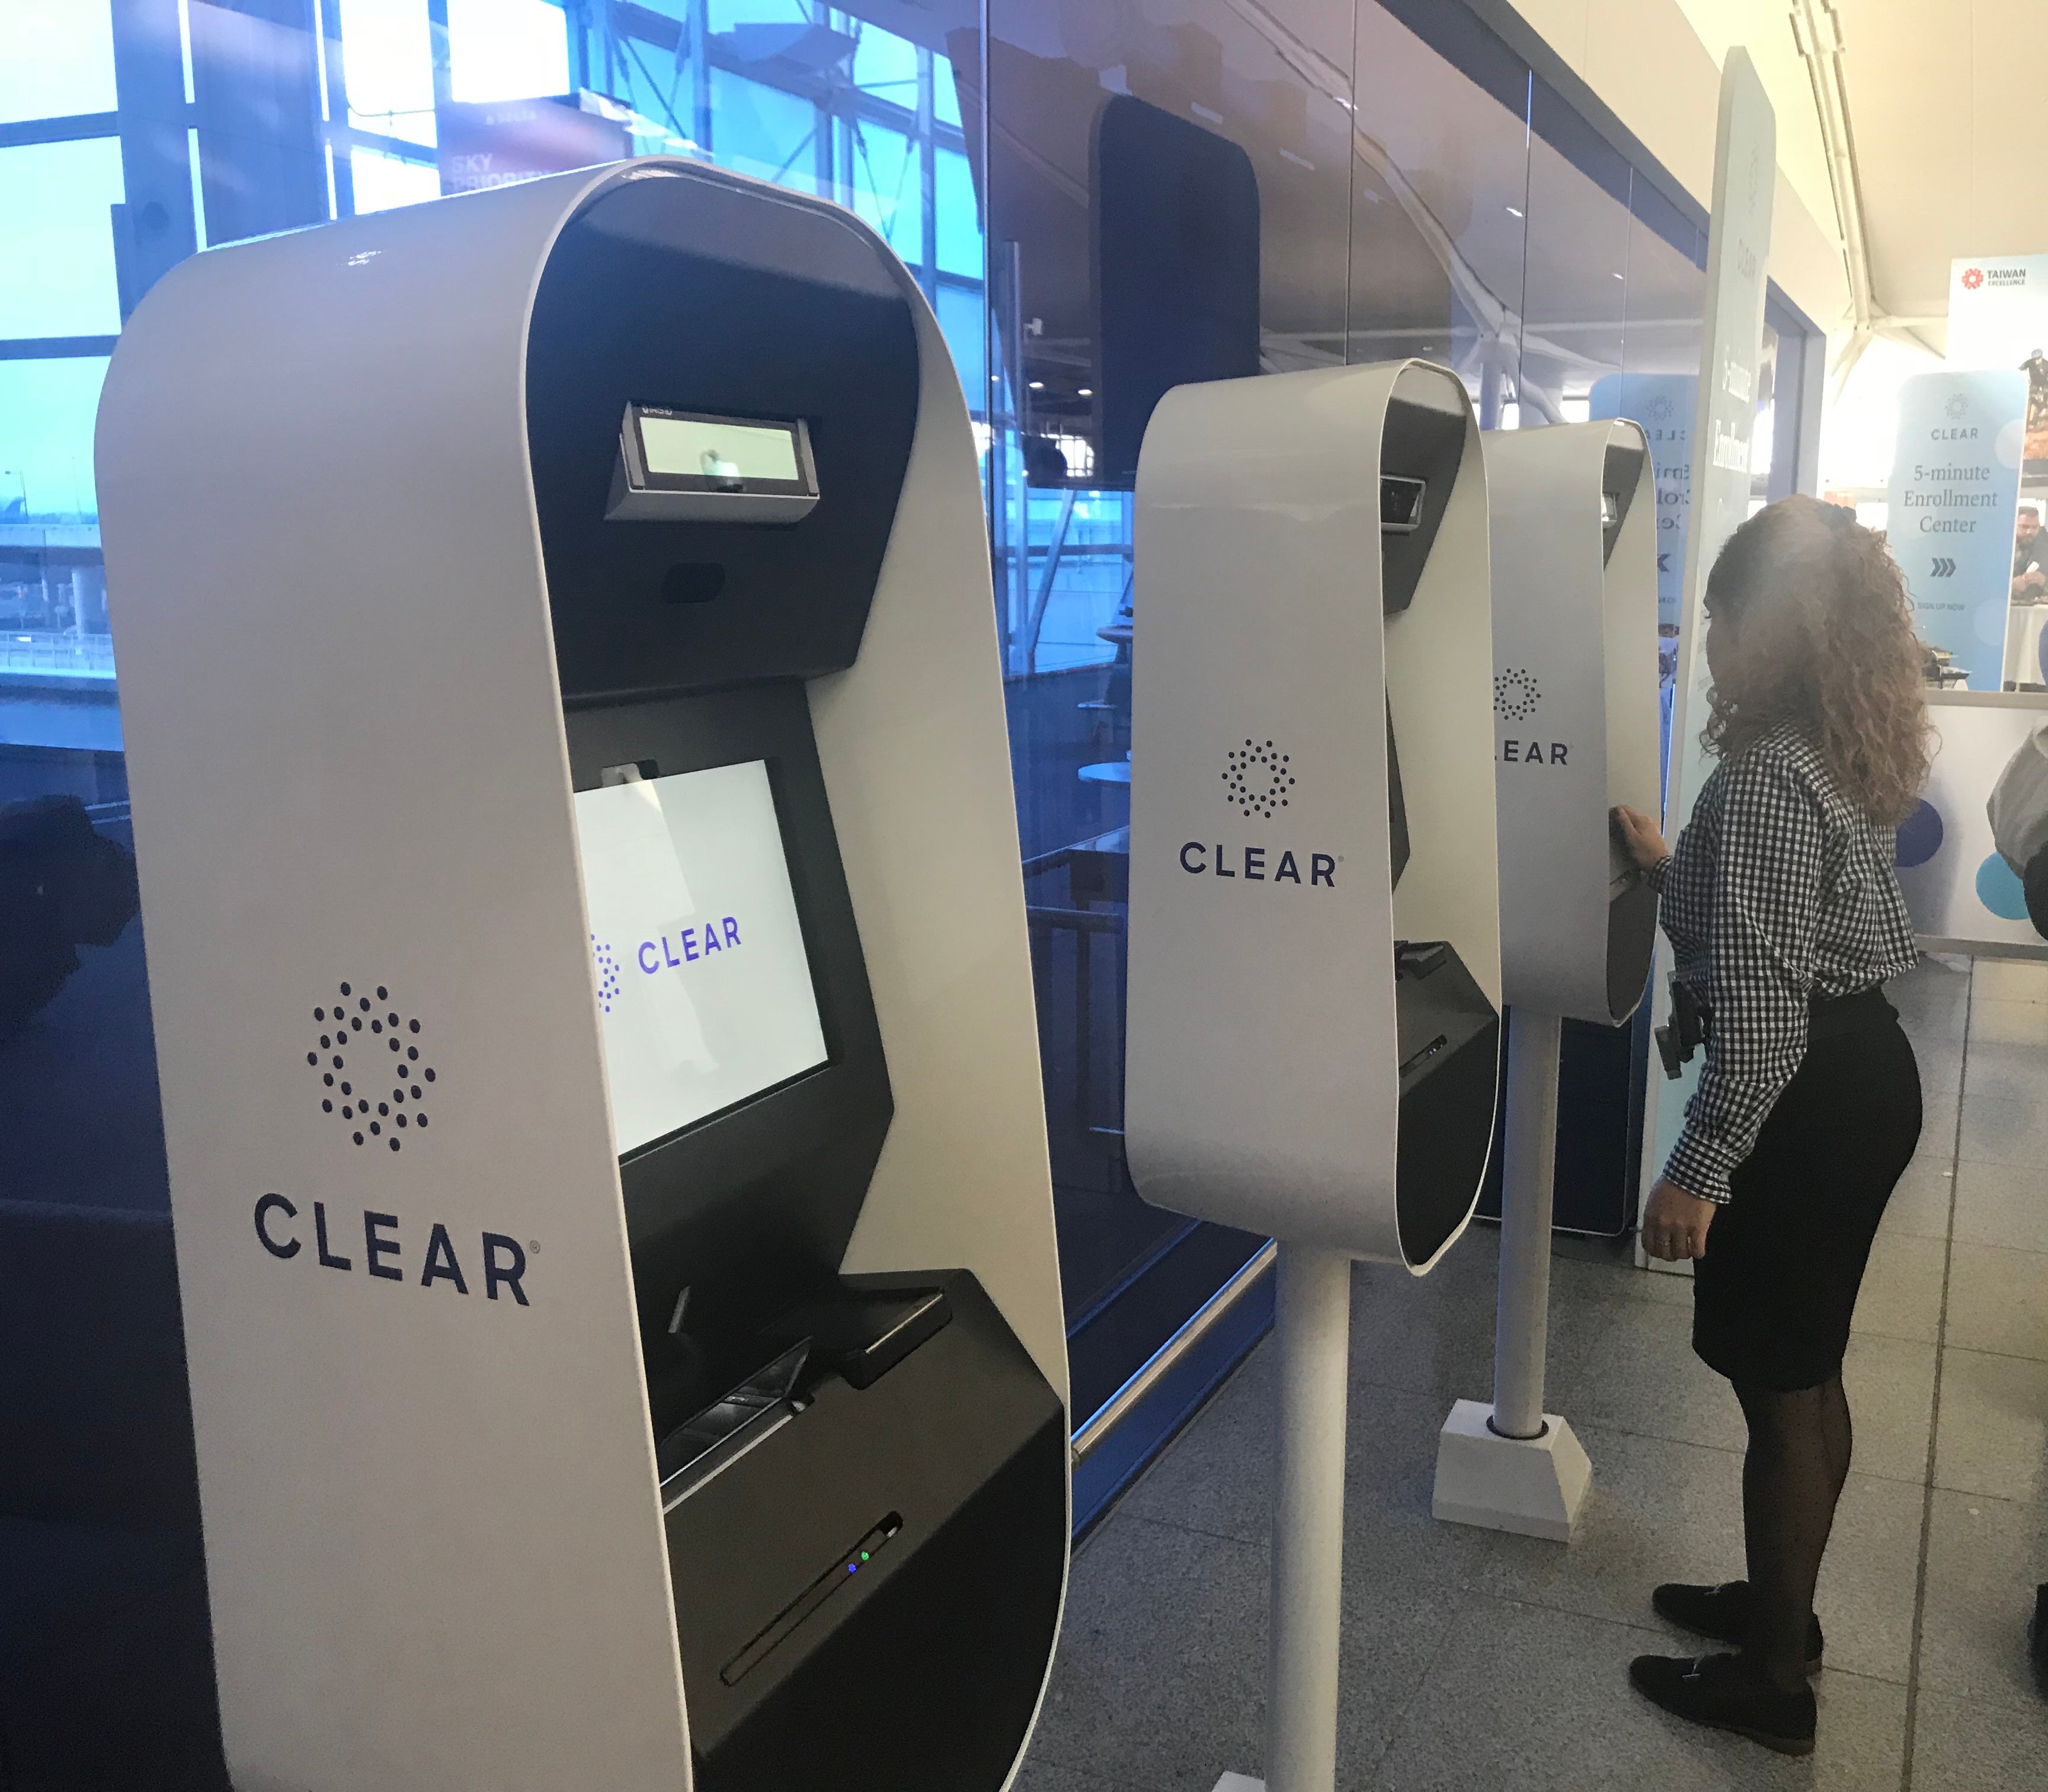 Customers user CLEAR kiosks at New York JFK airport. (Courtesy of Delta Air Lines)